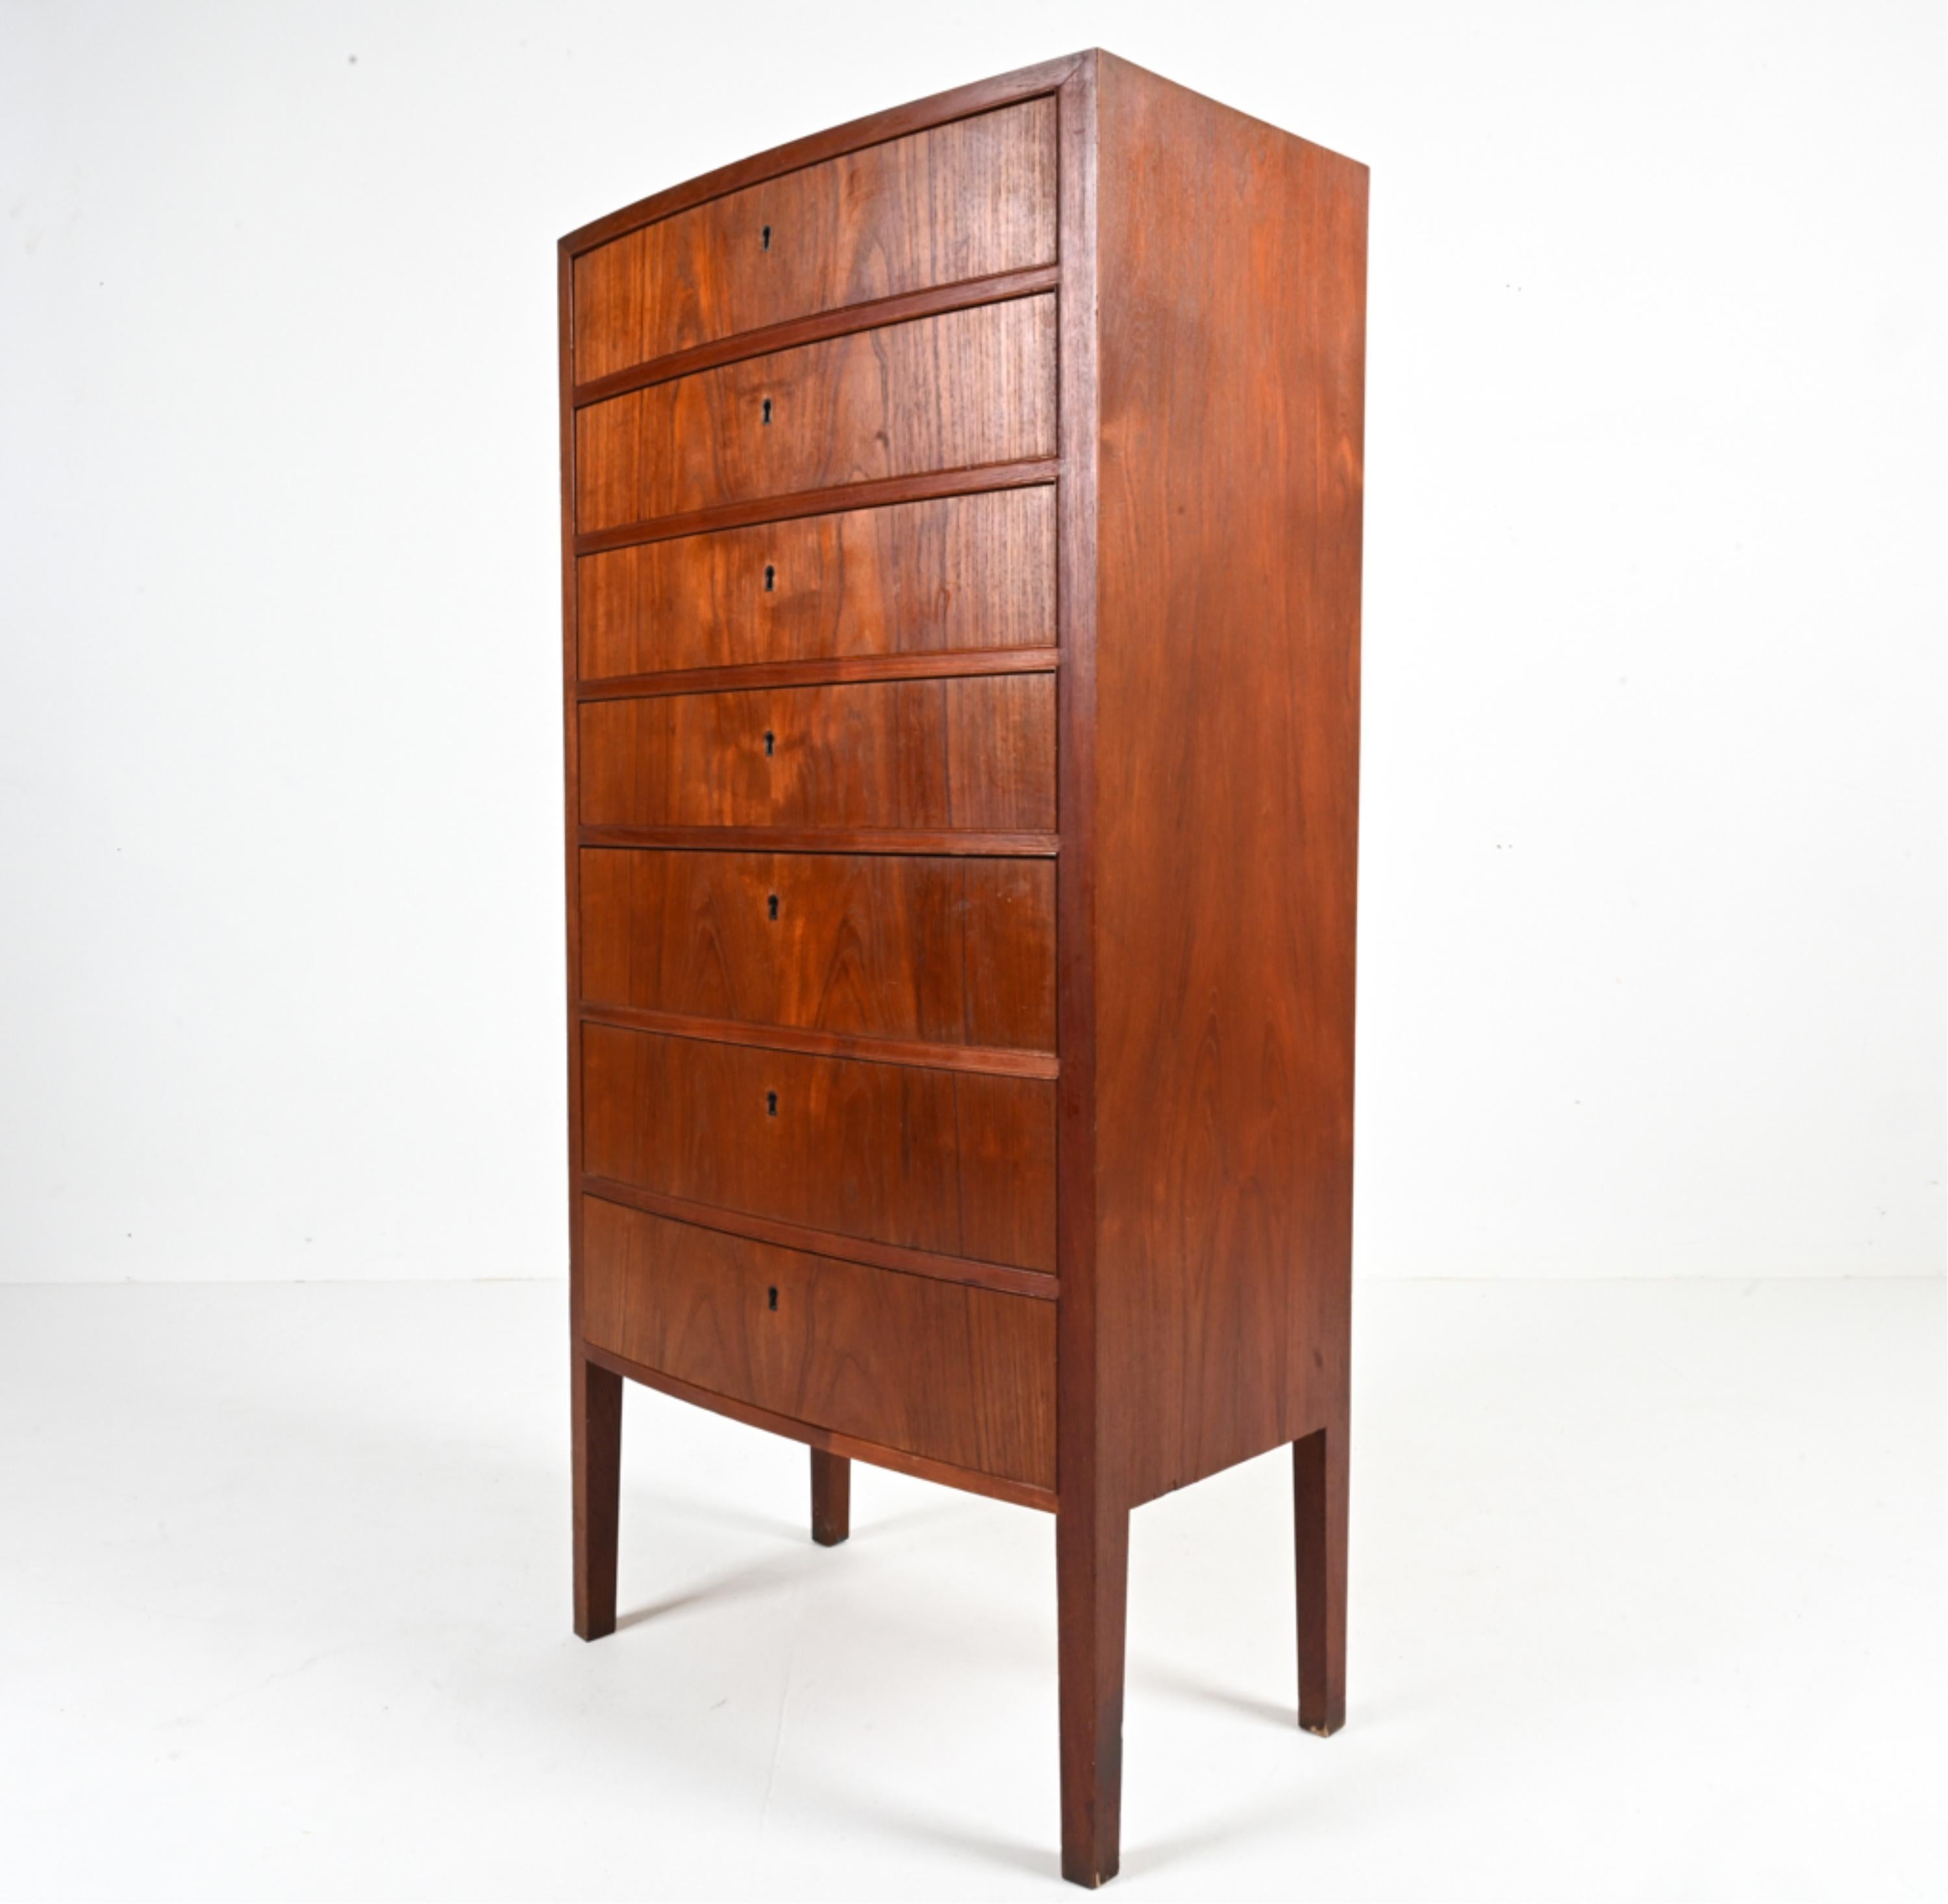 Introducing an exquisite piece of Mid-Century design: a teak bow-front tallboy chest of drawers attributed to the masterful Ole Wanscher, crafted in Denmark around 1950-1960. This iconic chest epitomizes the timeless elegance of Scandinavian